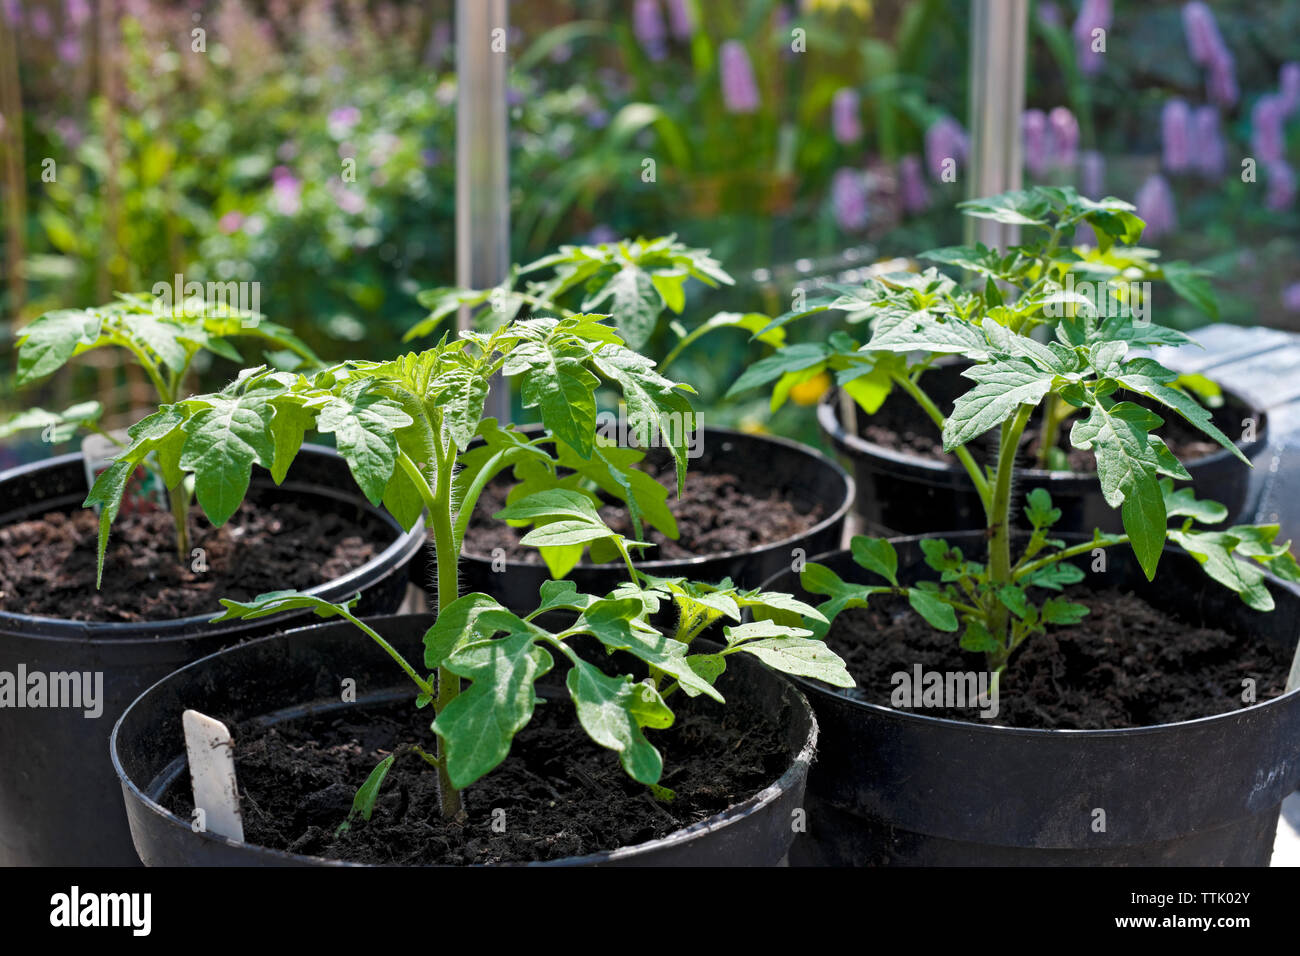 Pots of Gardeners Delight cherry tomato plant plants (Solanum lycopersicum) growing in a greenhouse in spring England UK United Kingdom Great Britain Stock Photo